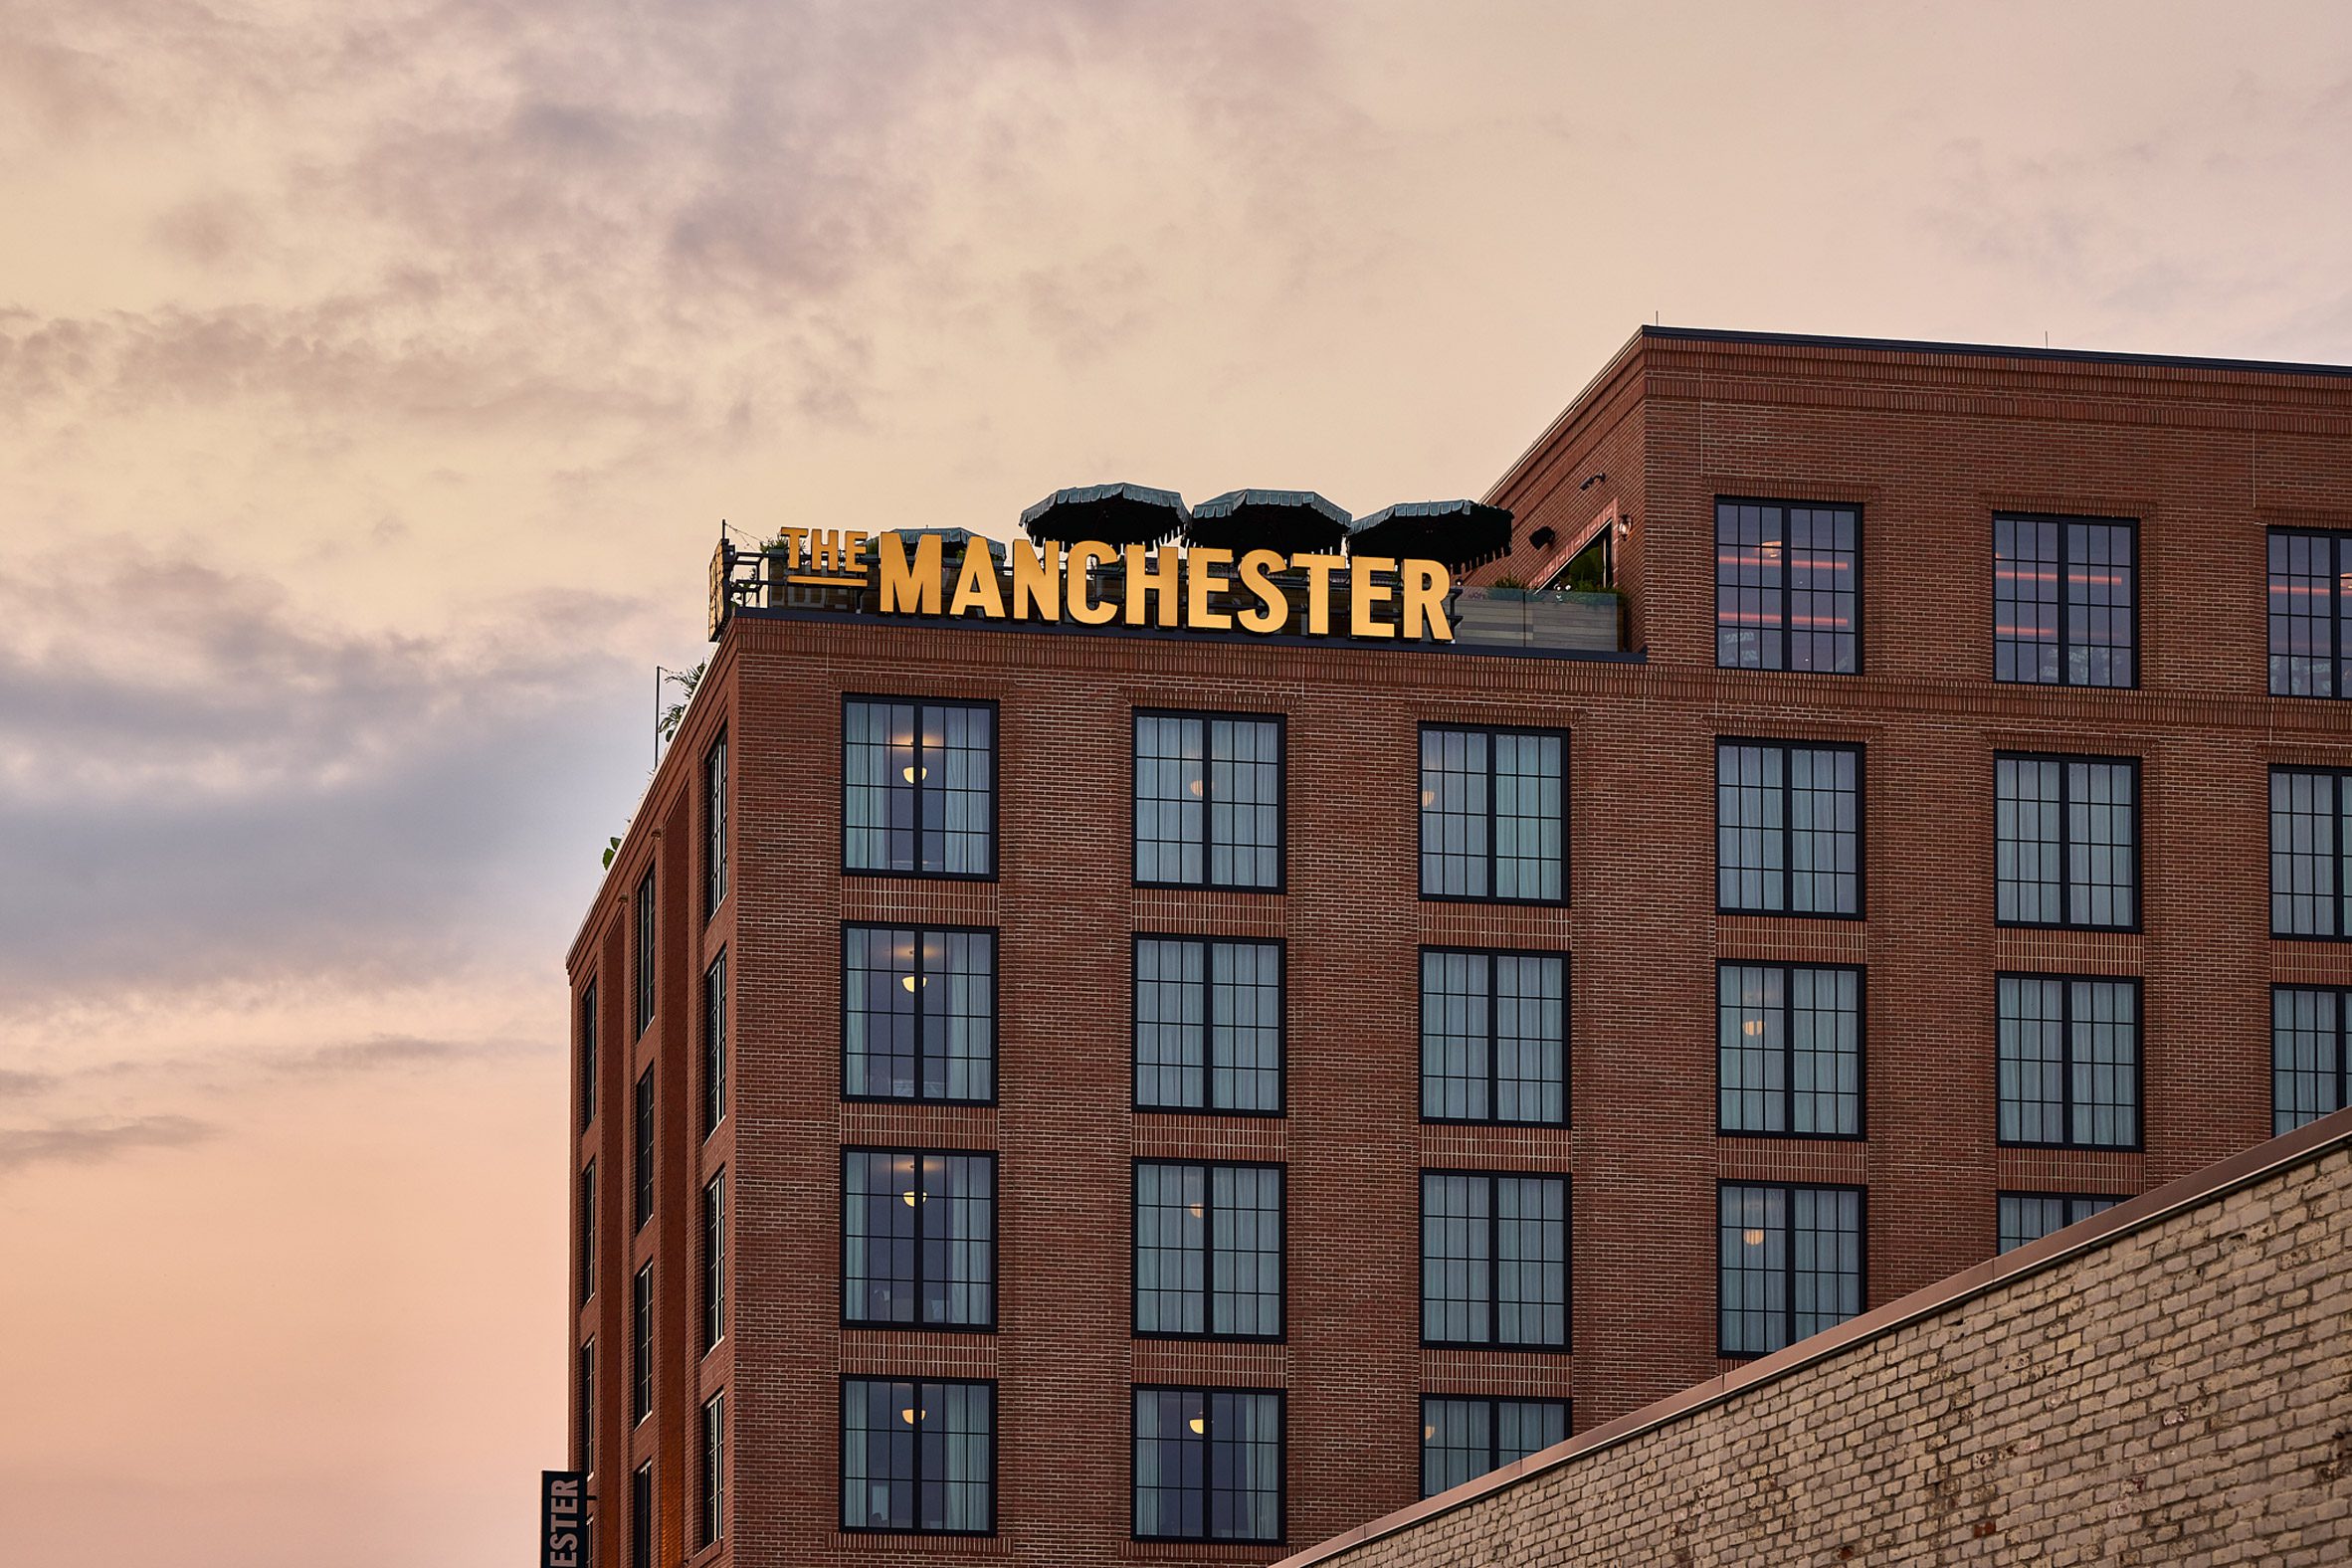 Exterior view of brick building with "The Manchester" sign in yellow